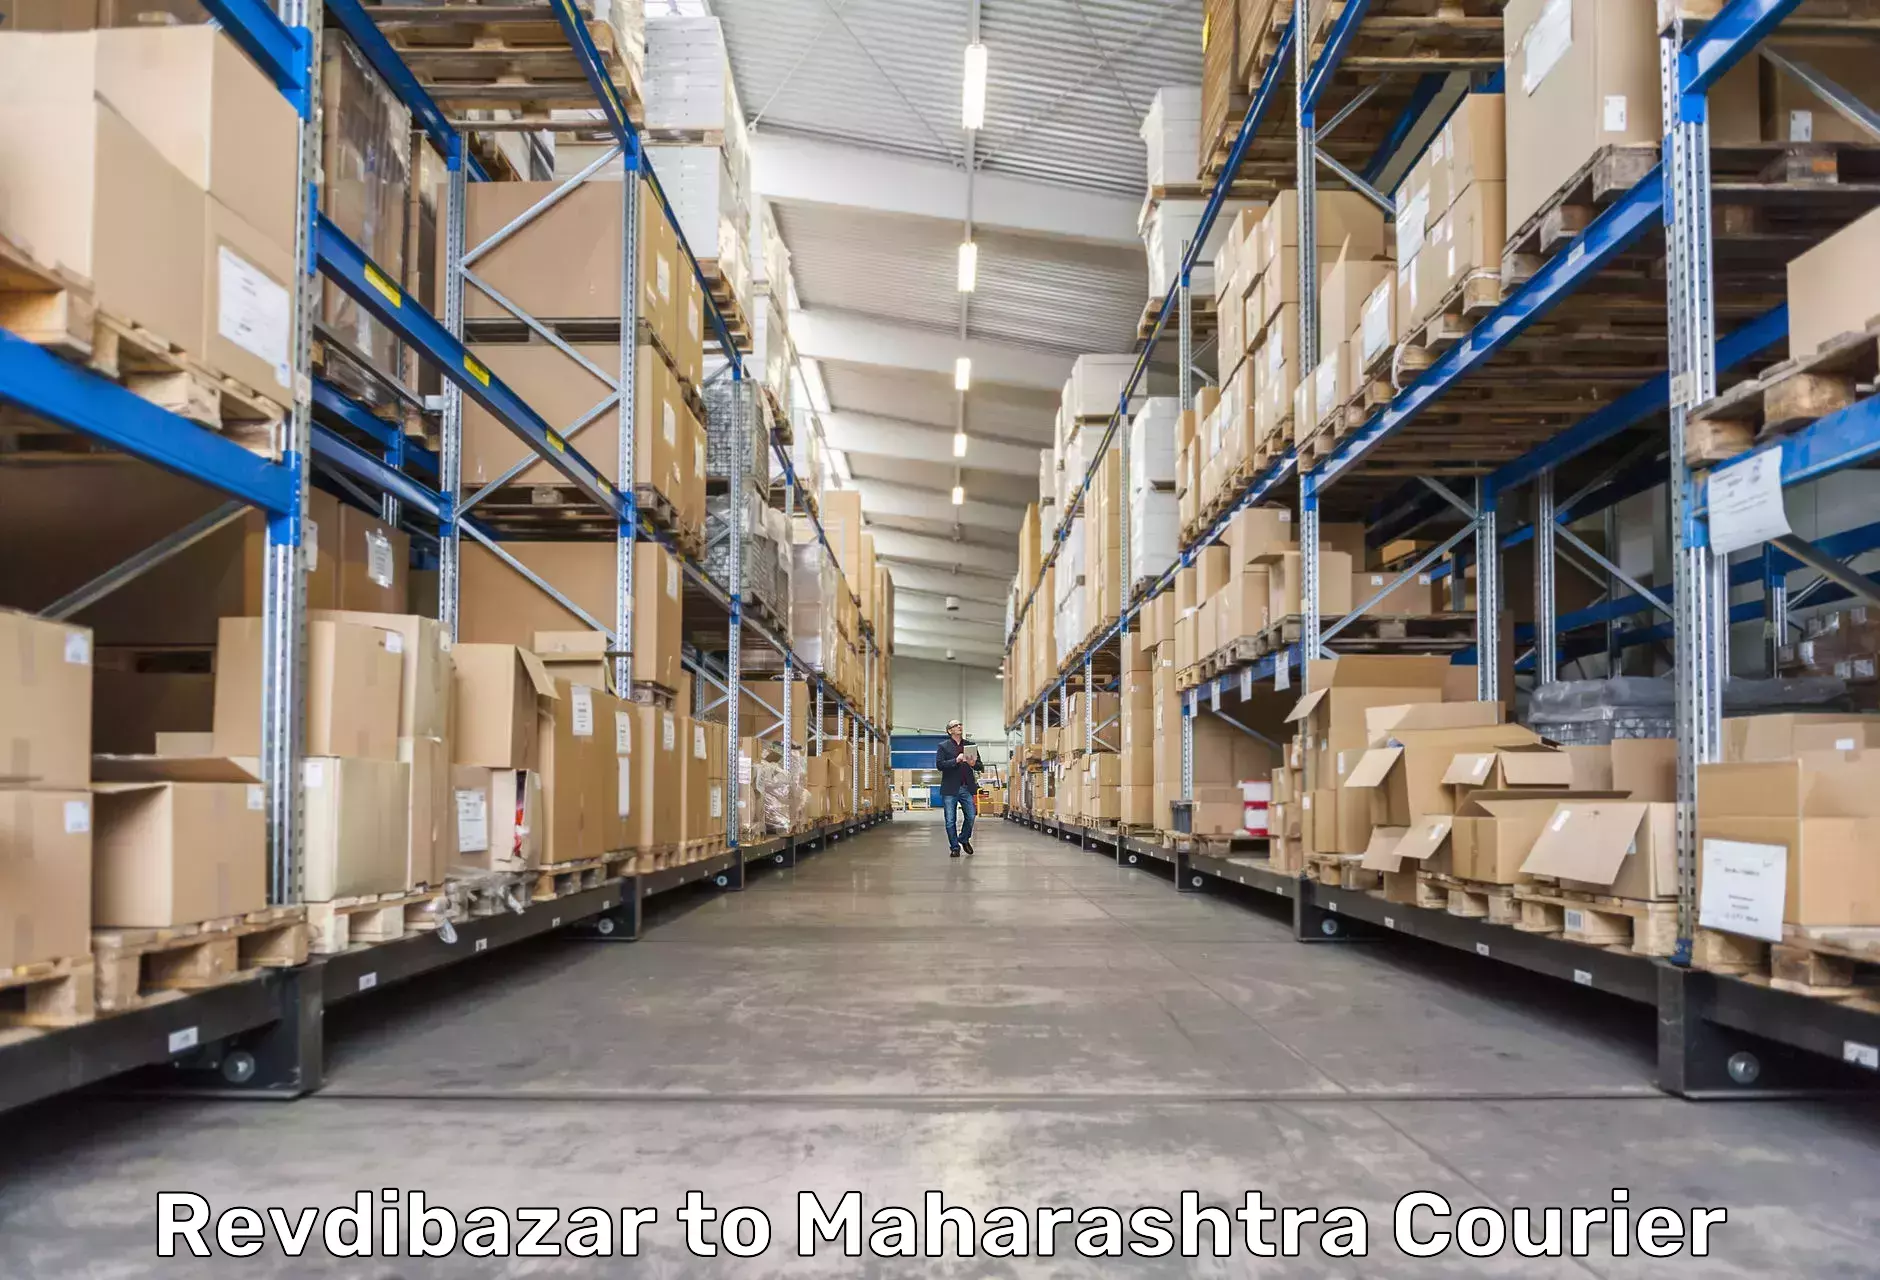 Parcel service for businesses in Revdibazar to Daund